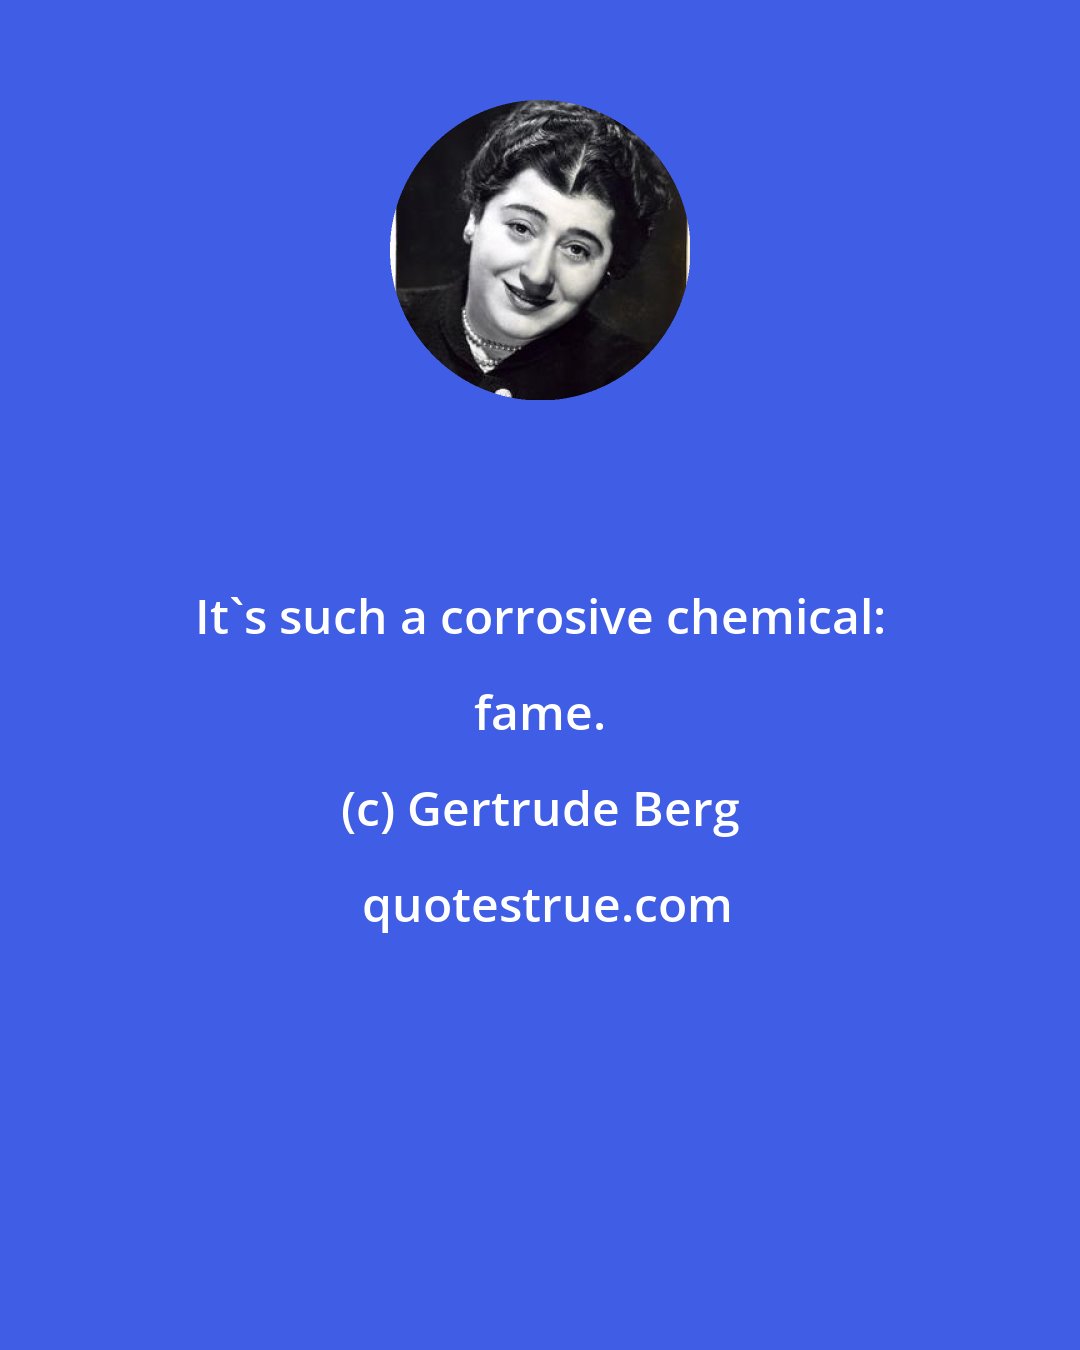 Gertrude Berg: It's such a corrosive chemical: fame.